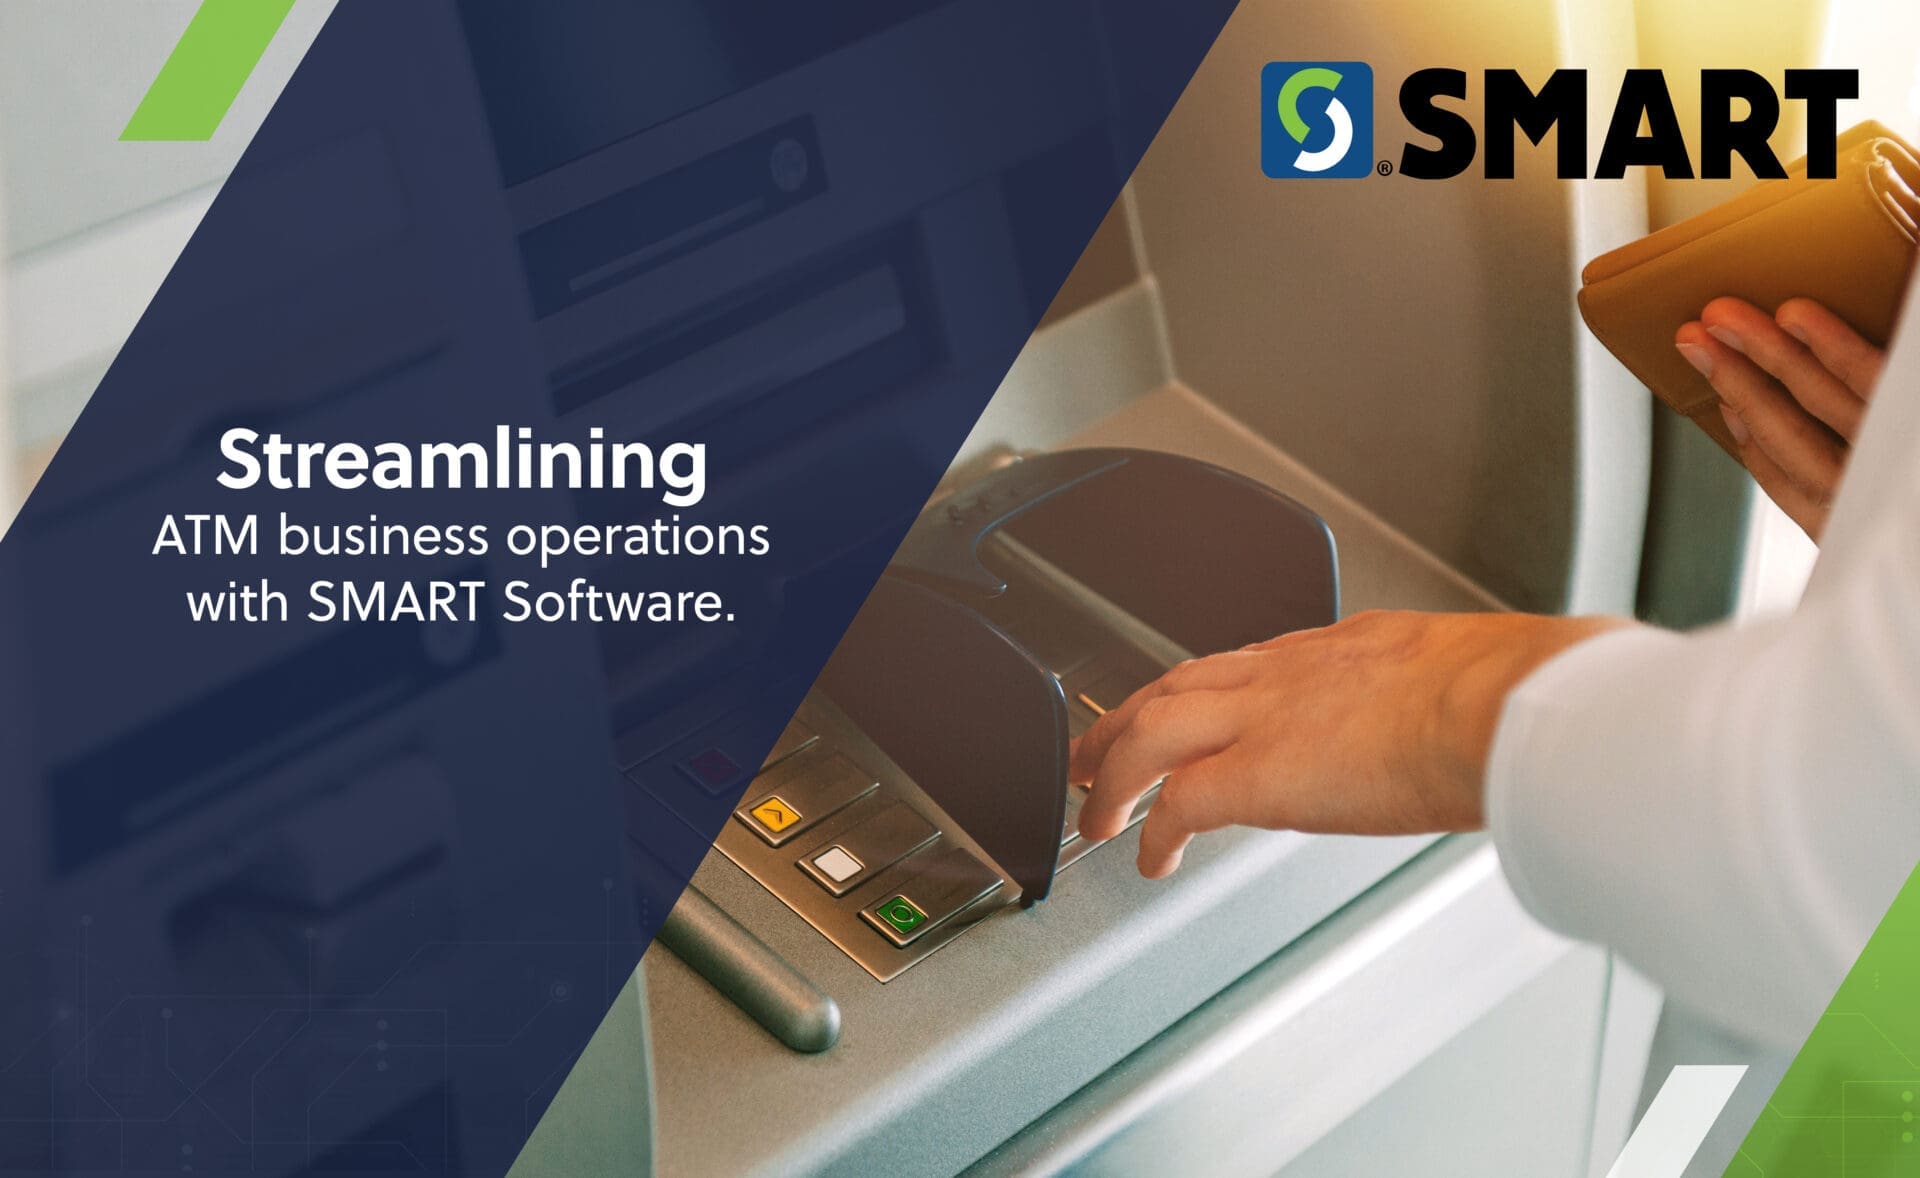 ATM business operations